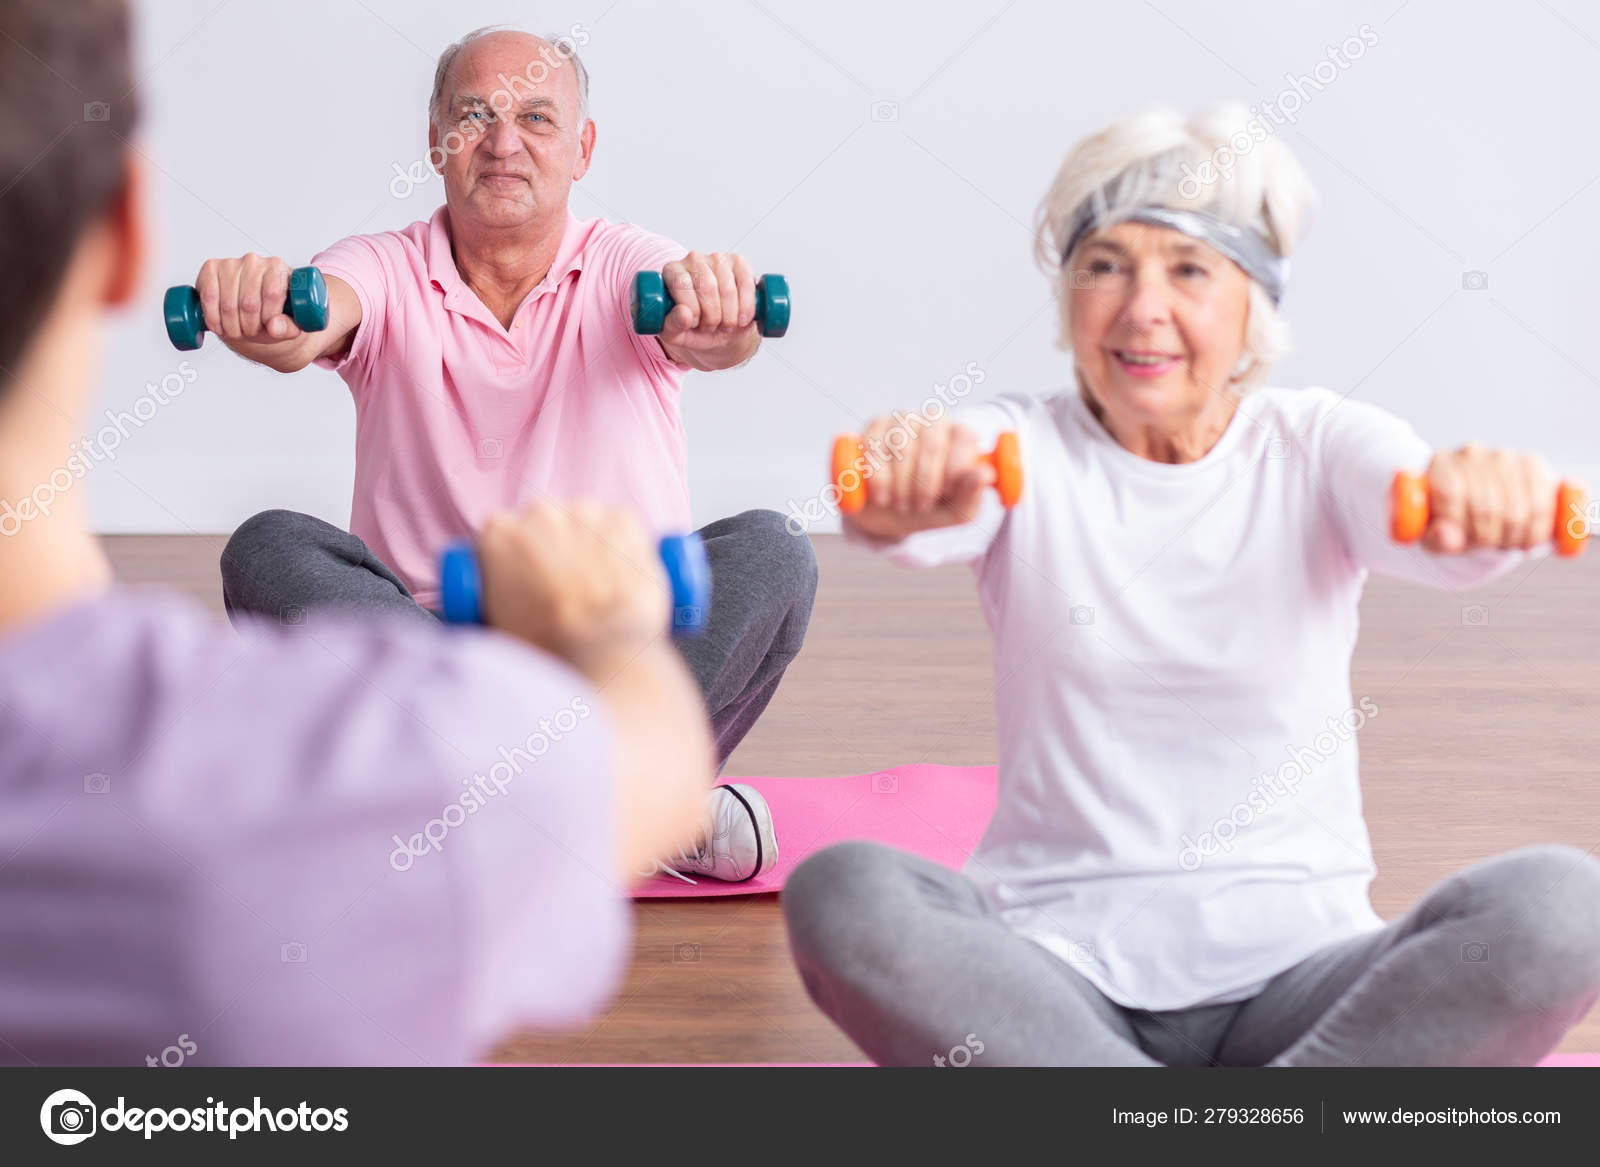 Elderly man and woman during wellness seniors workout at gym Stock